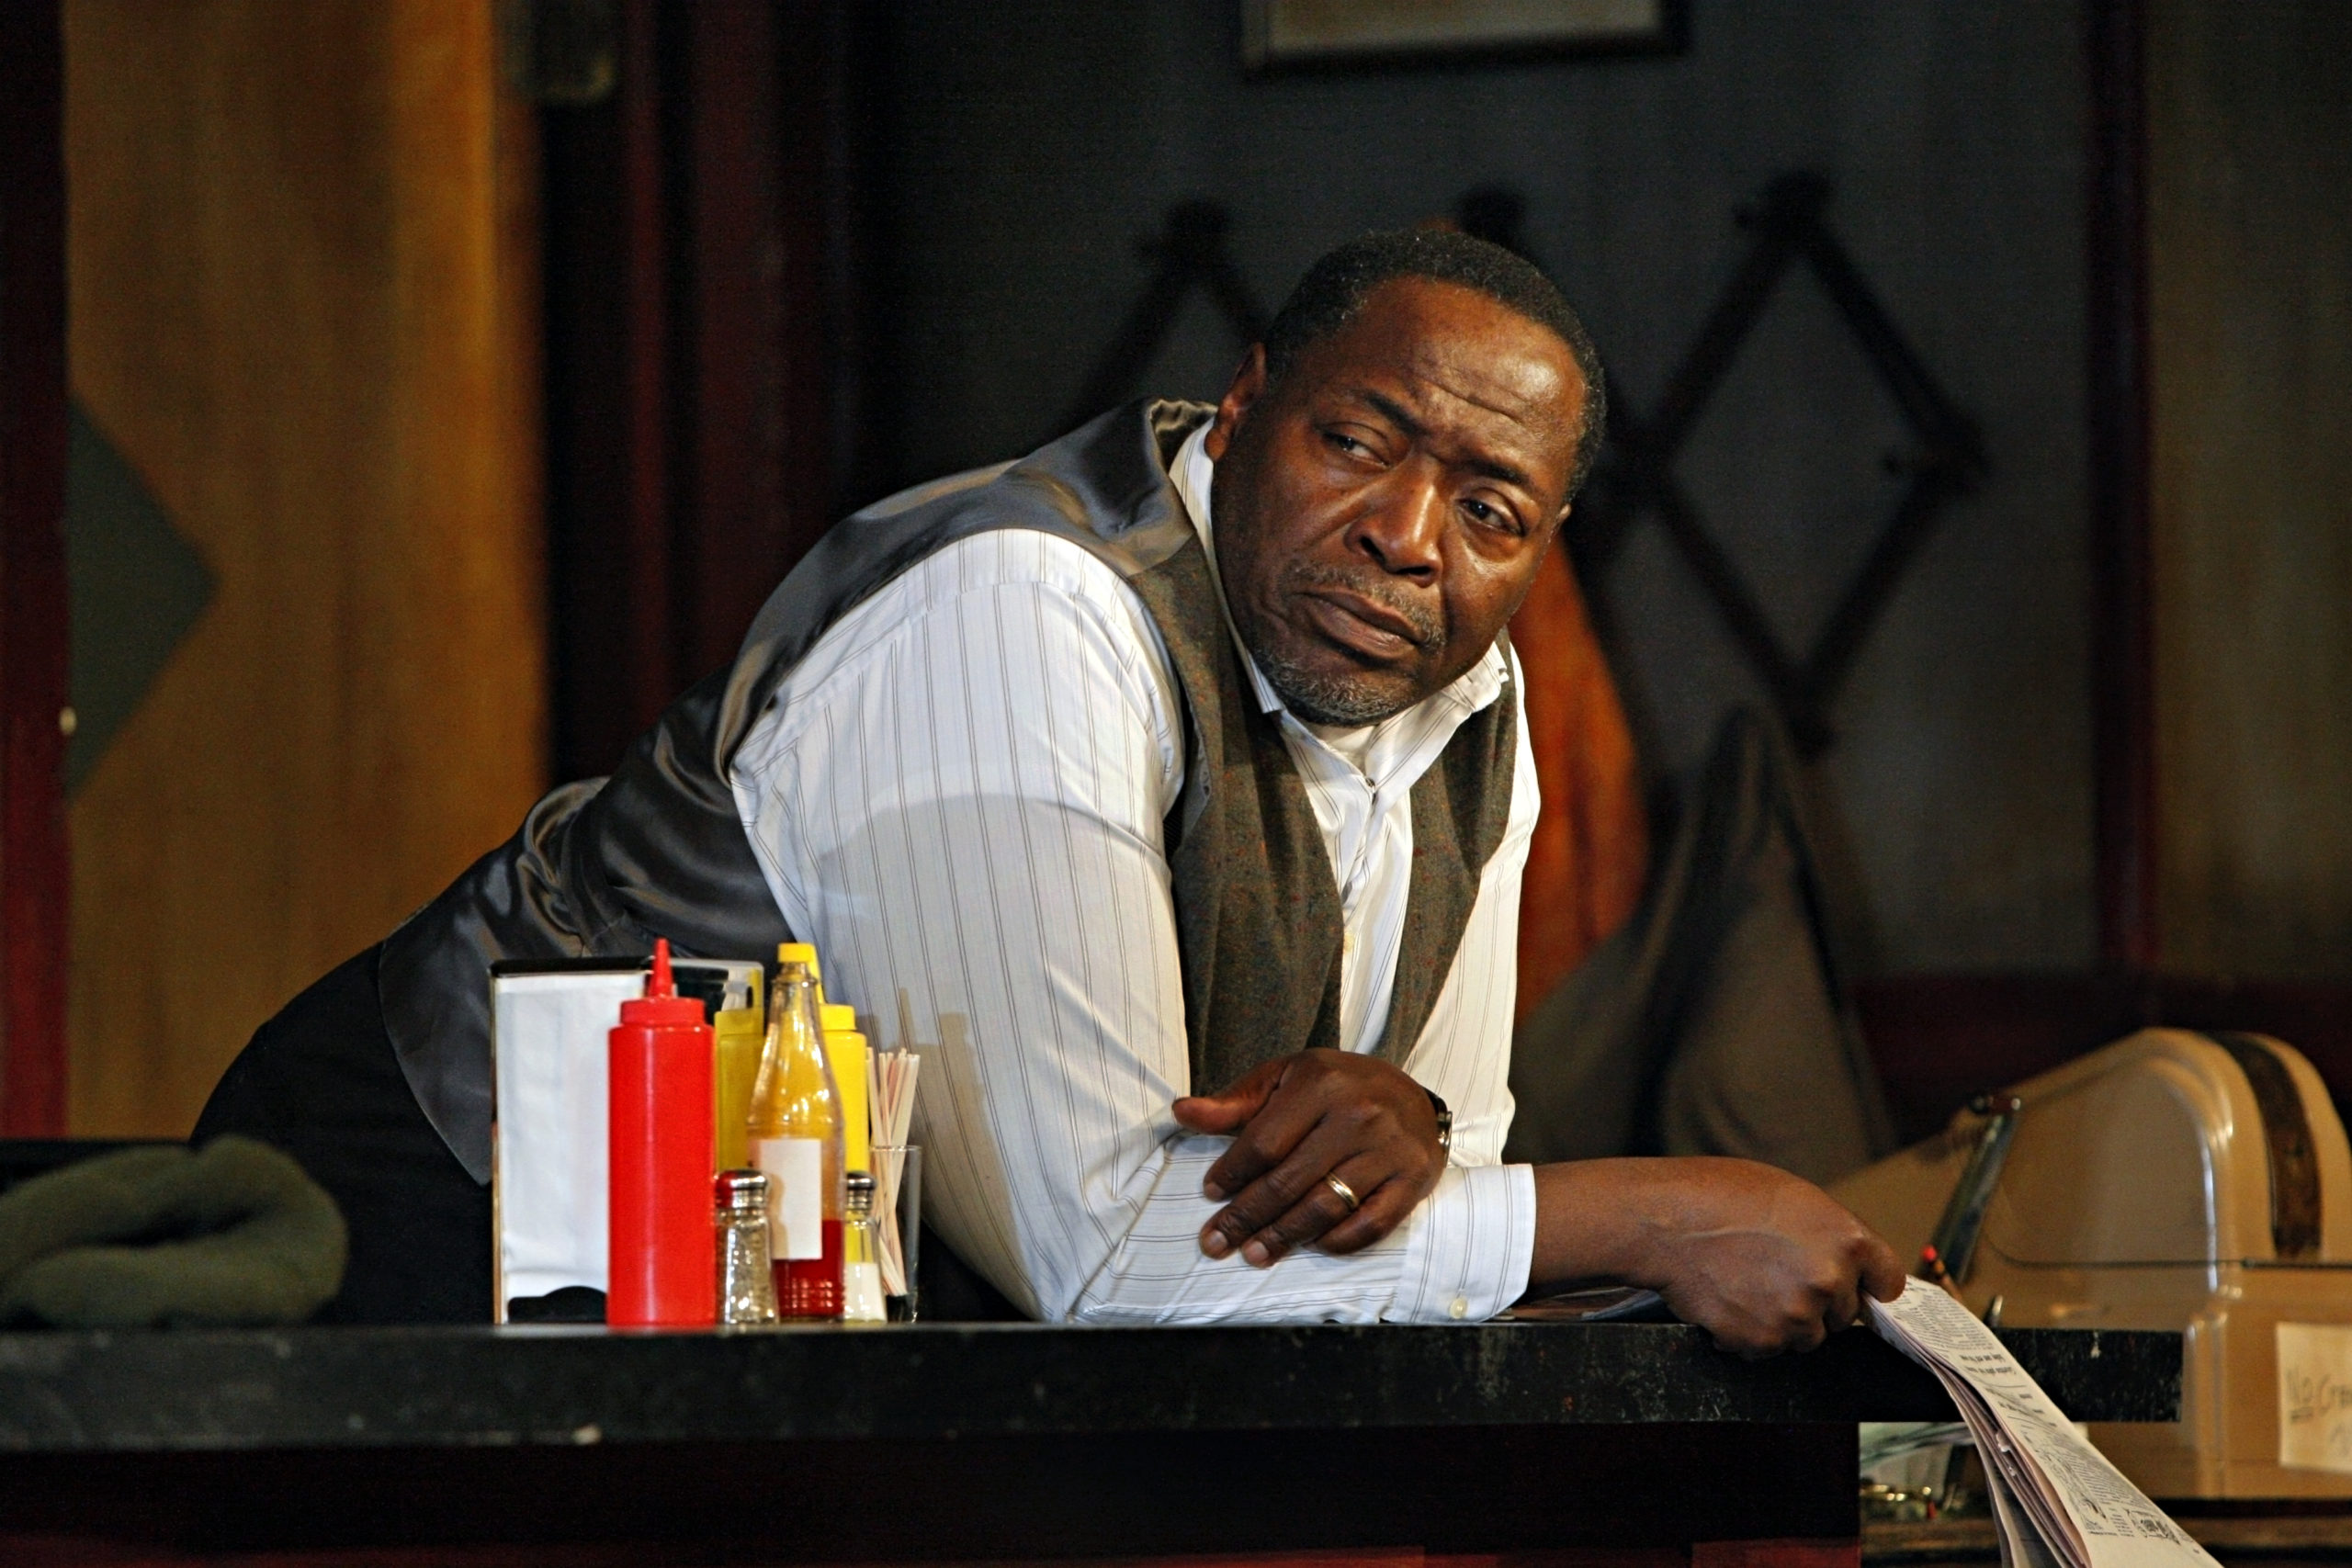 Chuck Cooper in August Wilson's Two Trains Running photo by Michal Daniel